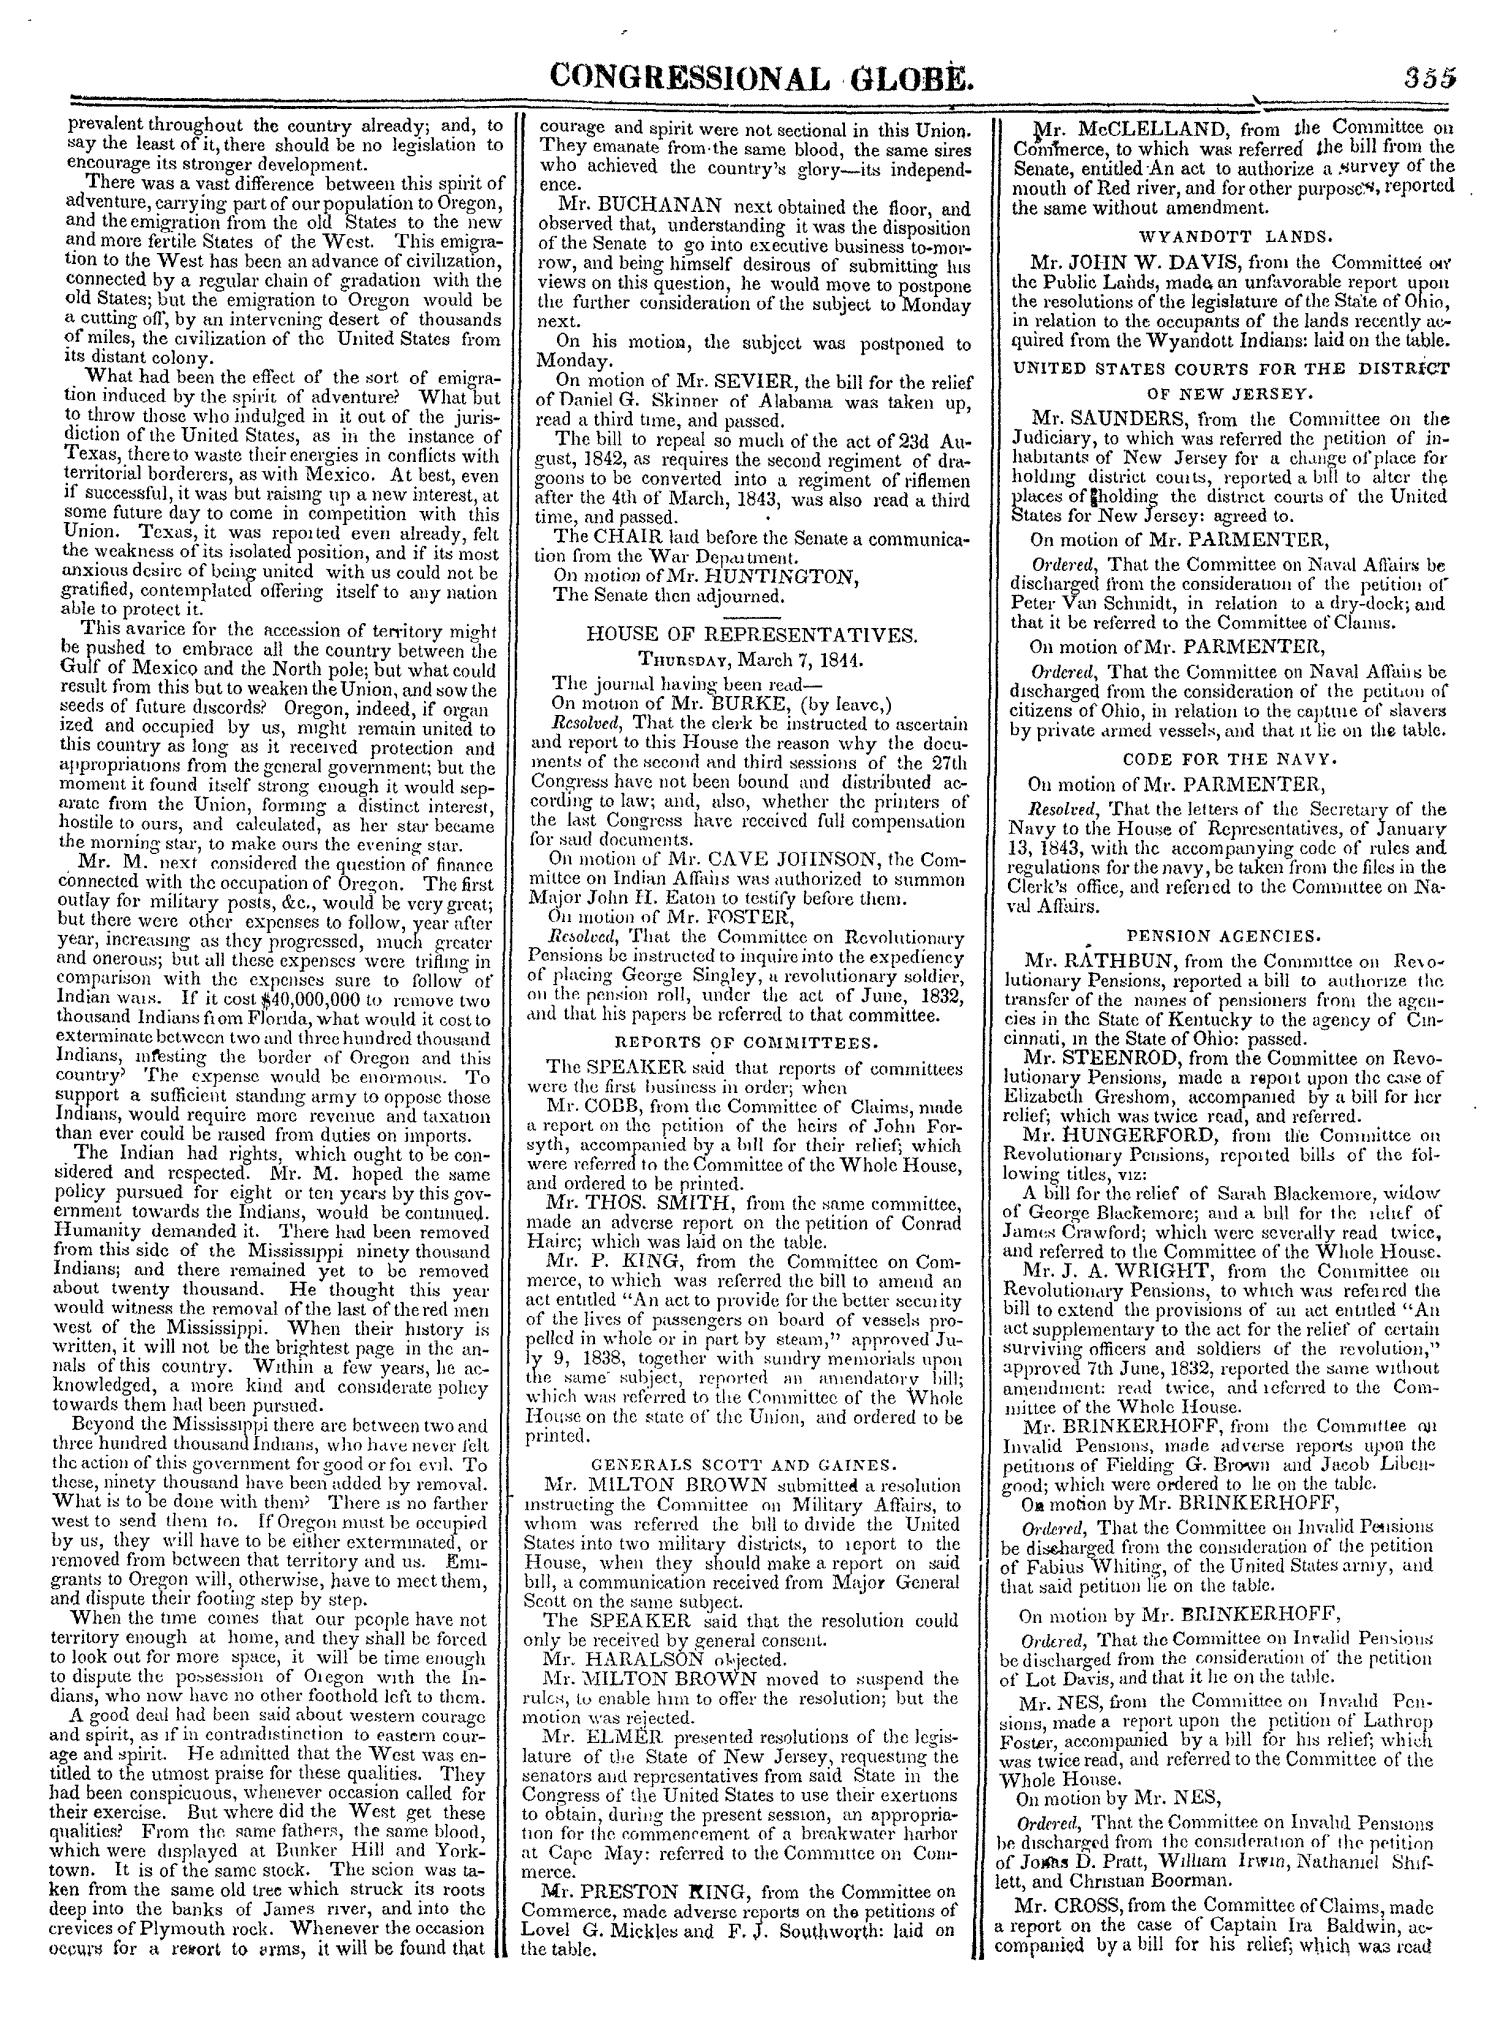 The Congressional Globe, Volume 13, Part 1: Twenty-Eighth Congress, First Session
                                                
                                                    355
                                                